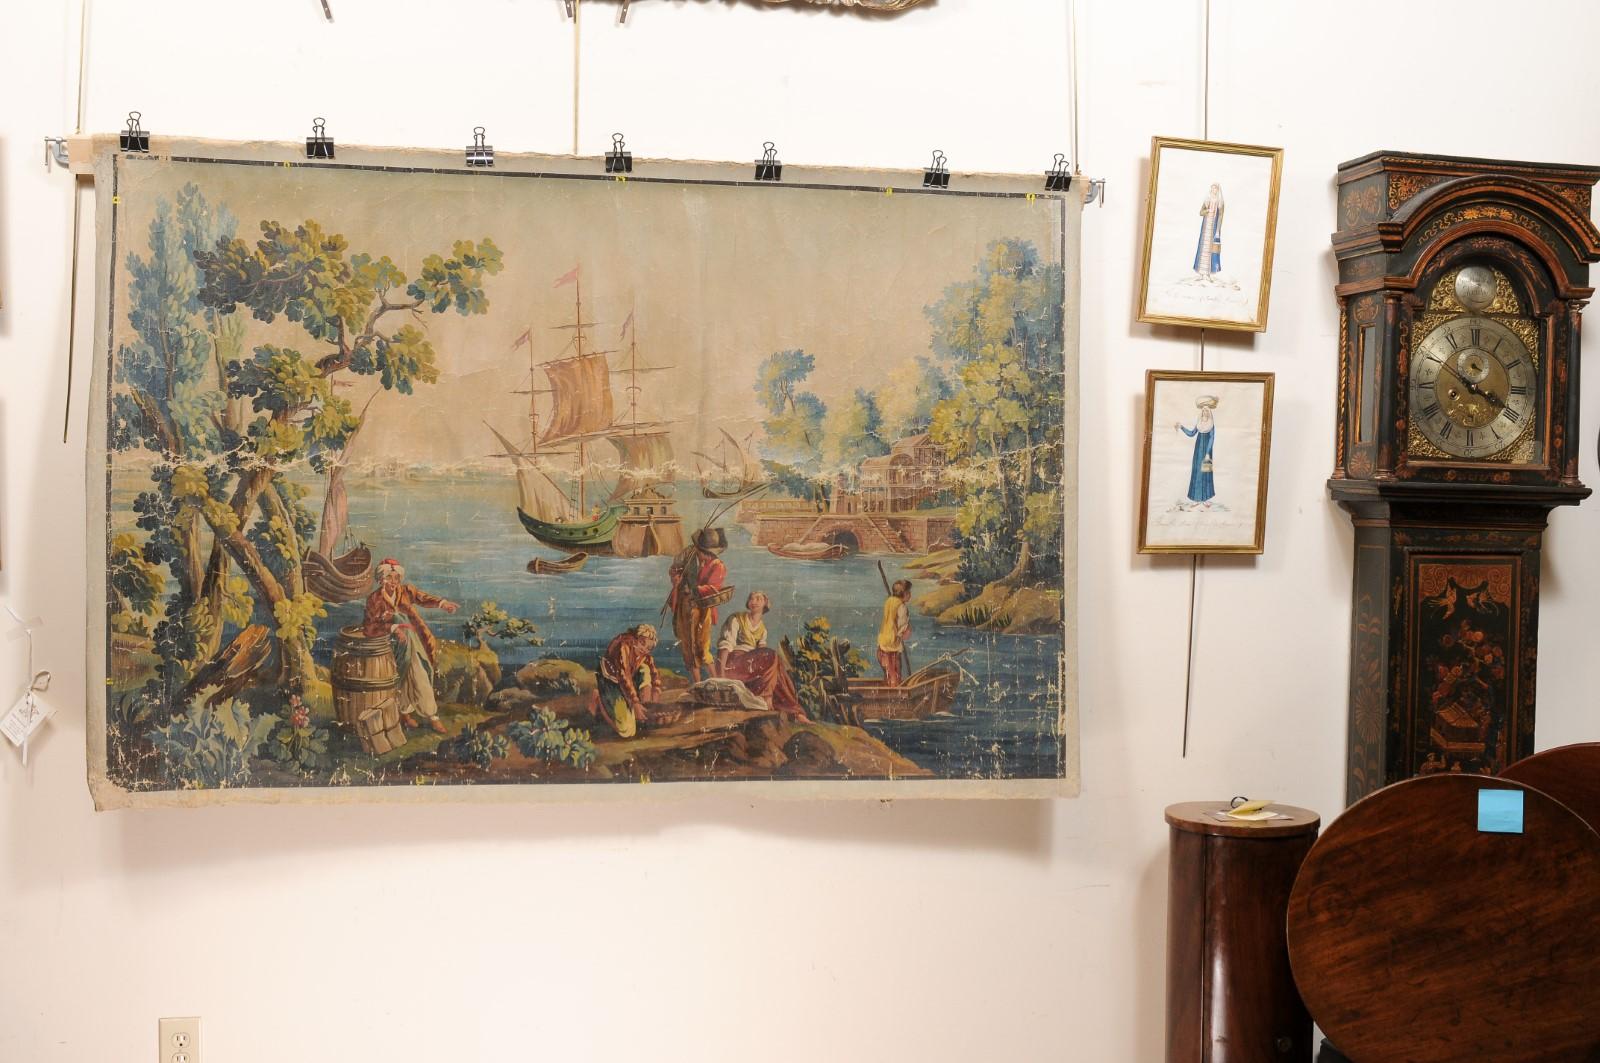 Large Early 19th Century French Oil on Linen Painted Panel with Waterway Scene For Sale 7